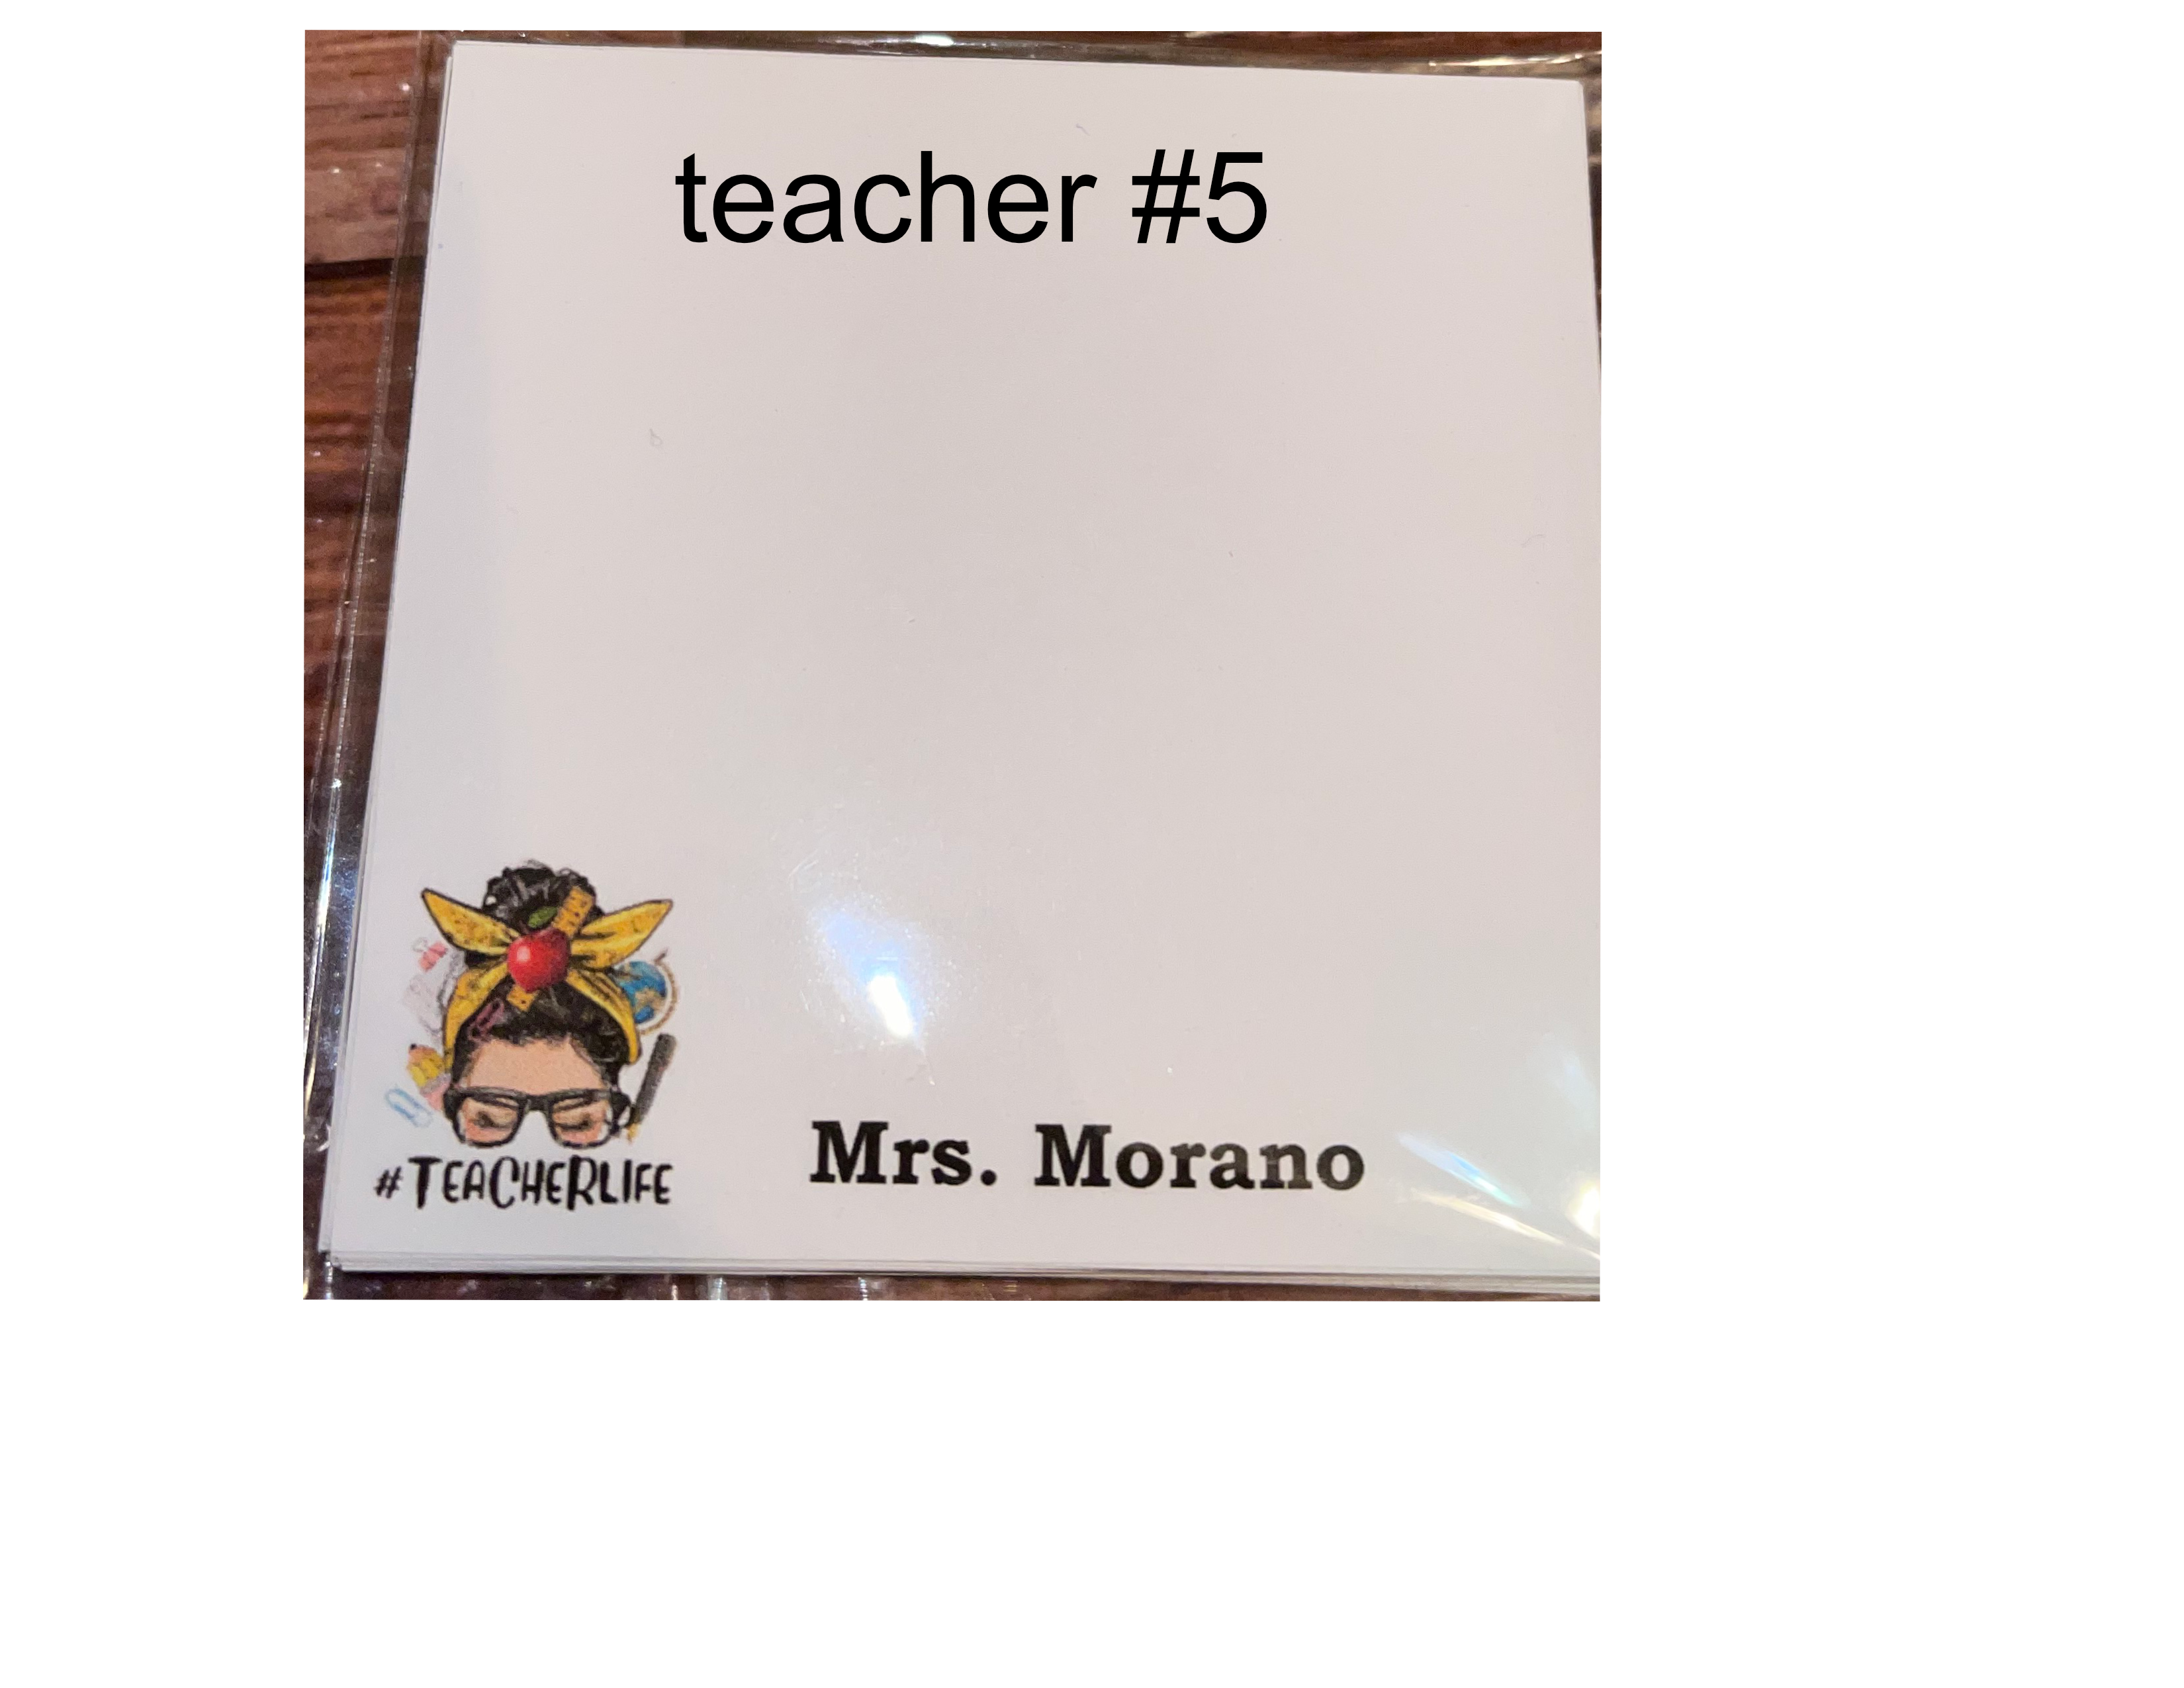 #TEACHERLIFE Post Notes 3x3 Personalized Post Notes